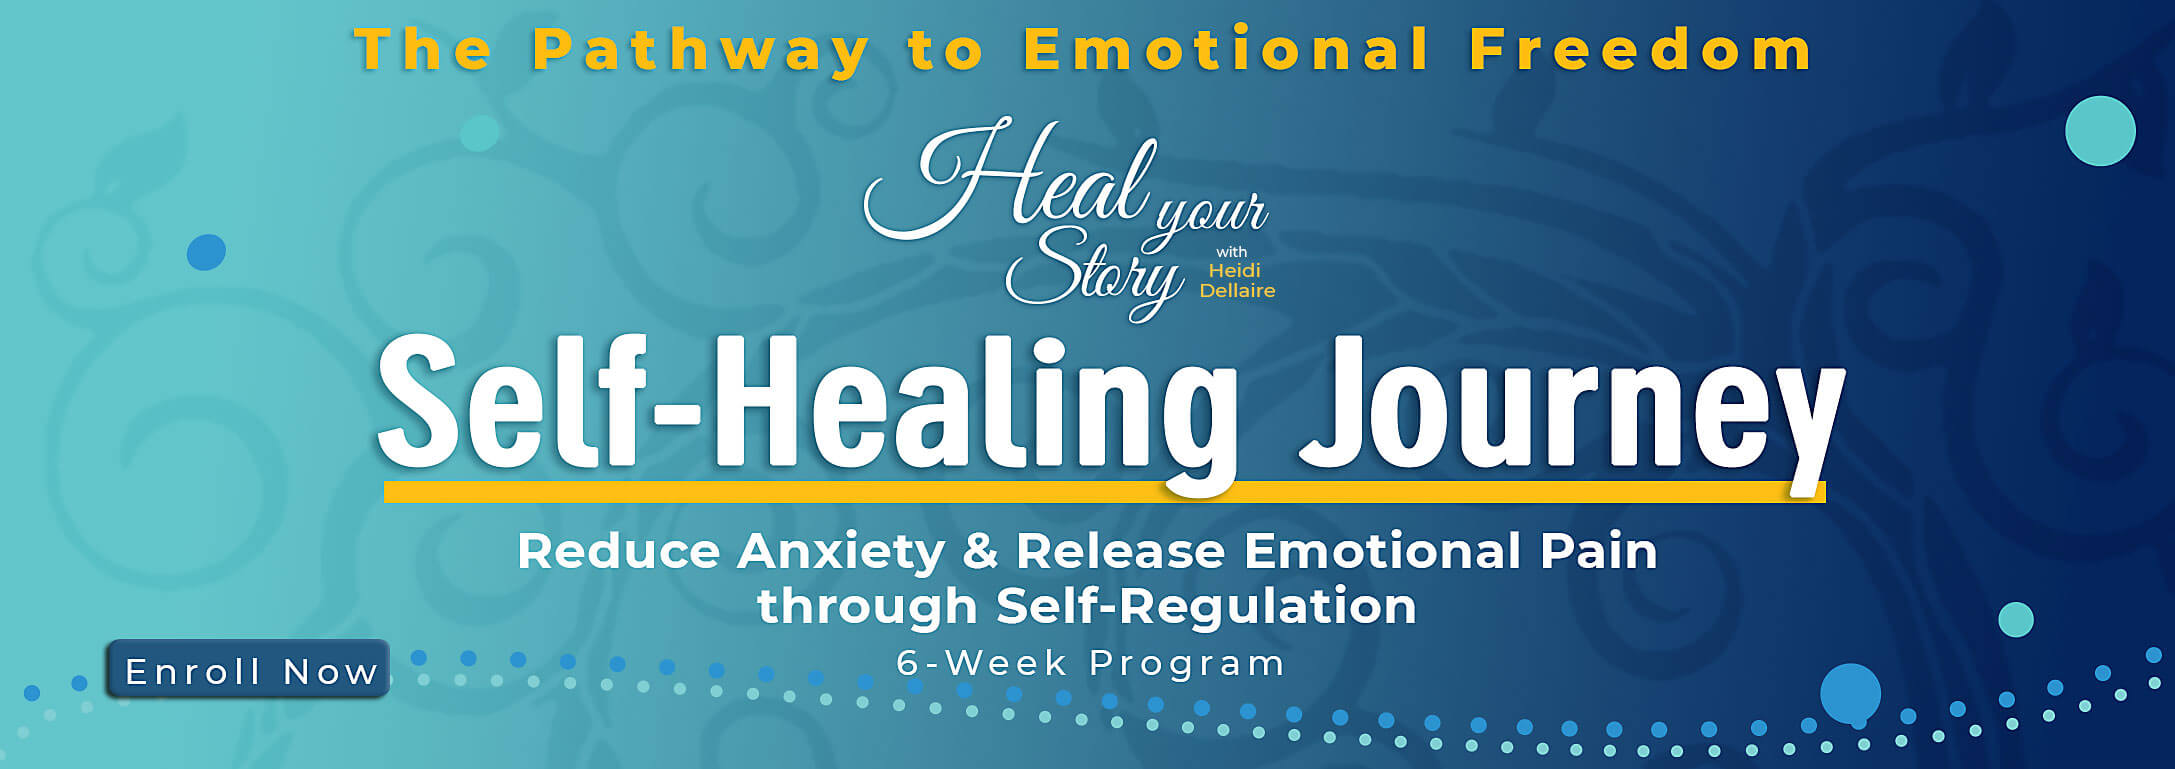 Self Healing Journey Course Ad